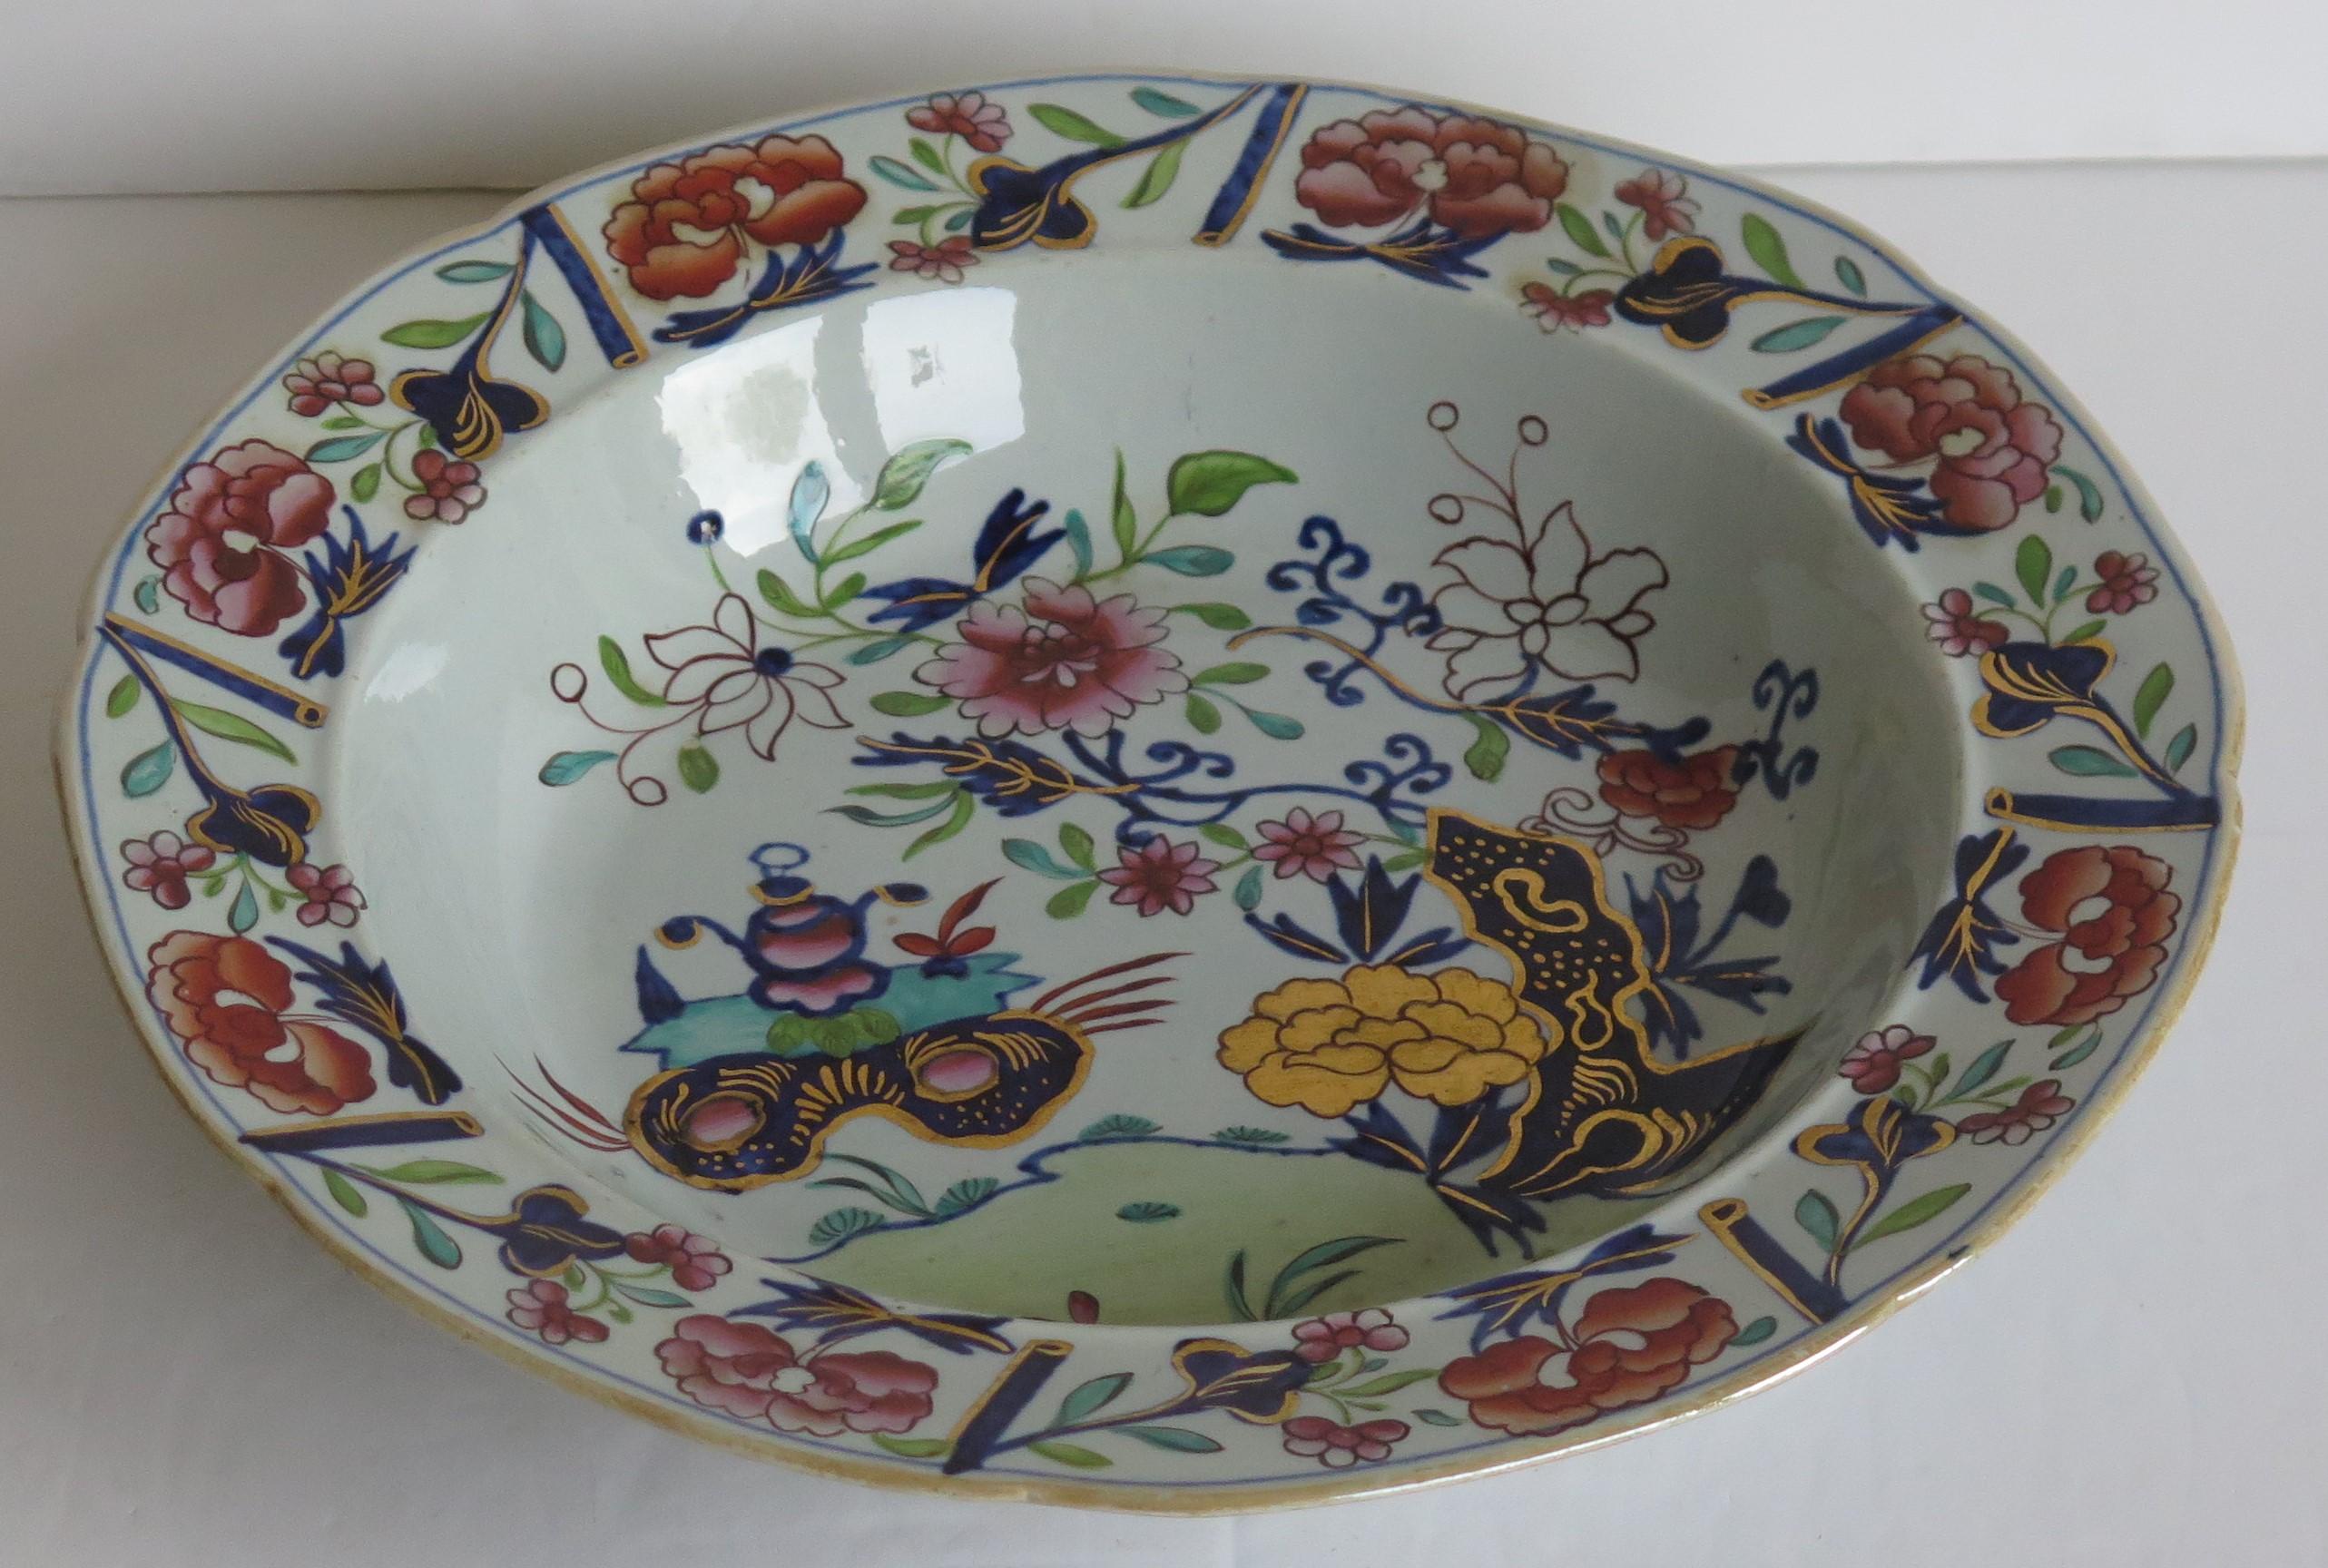 This is a fine Ironstone pottery soup bowl or deep plate made by the Mason's factory at Lane Delph, Staffordshire, England and beautifully decorated in the Small Vase, flower & Rock Pattern, fully stamped and dating to the earliest period of Mason's